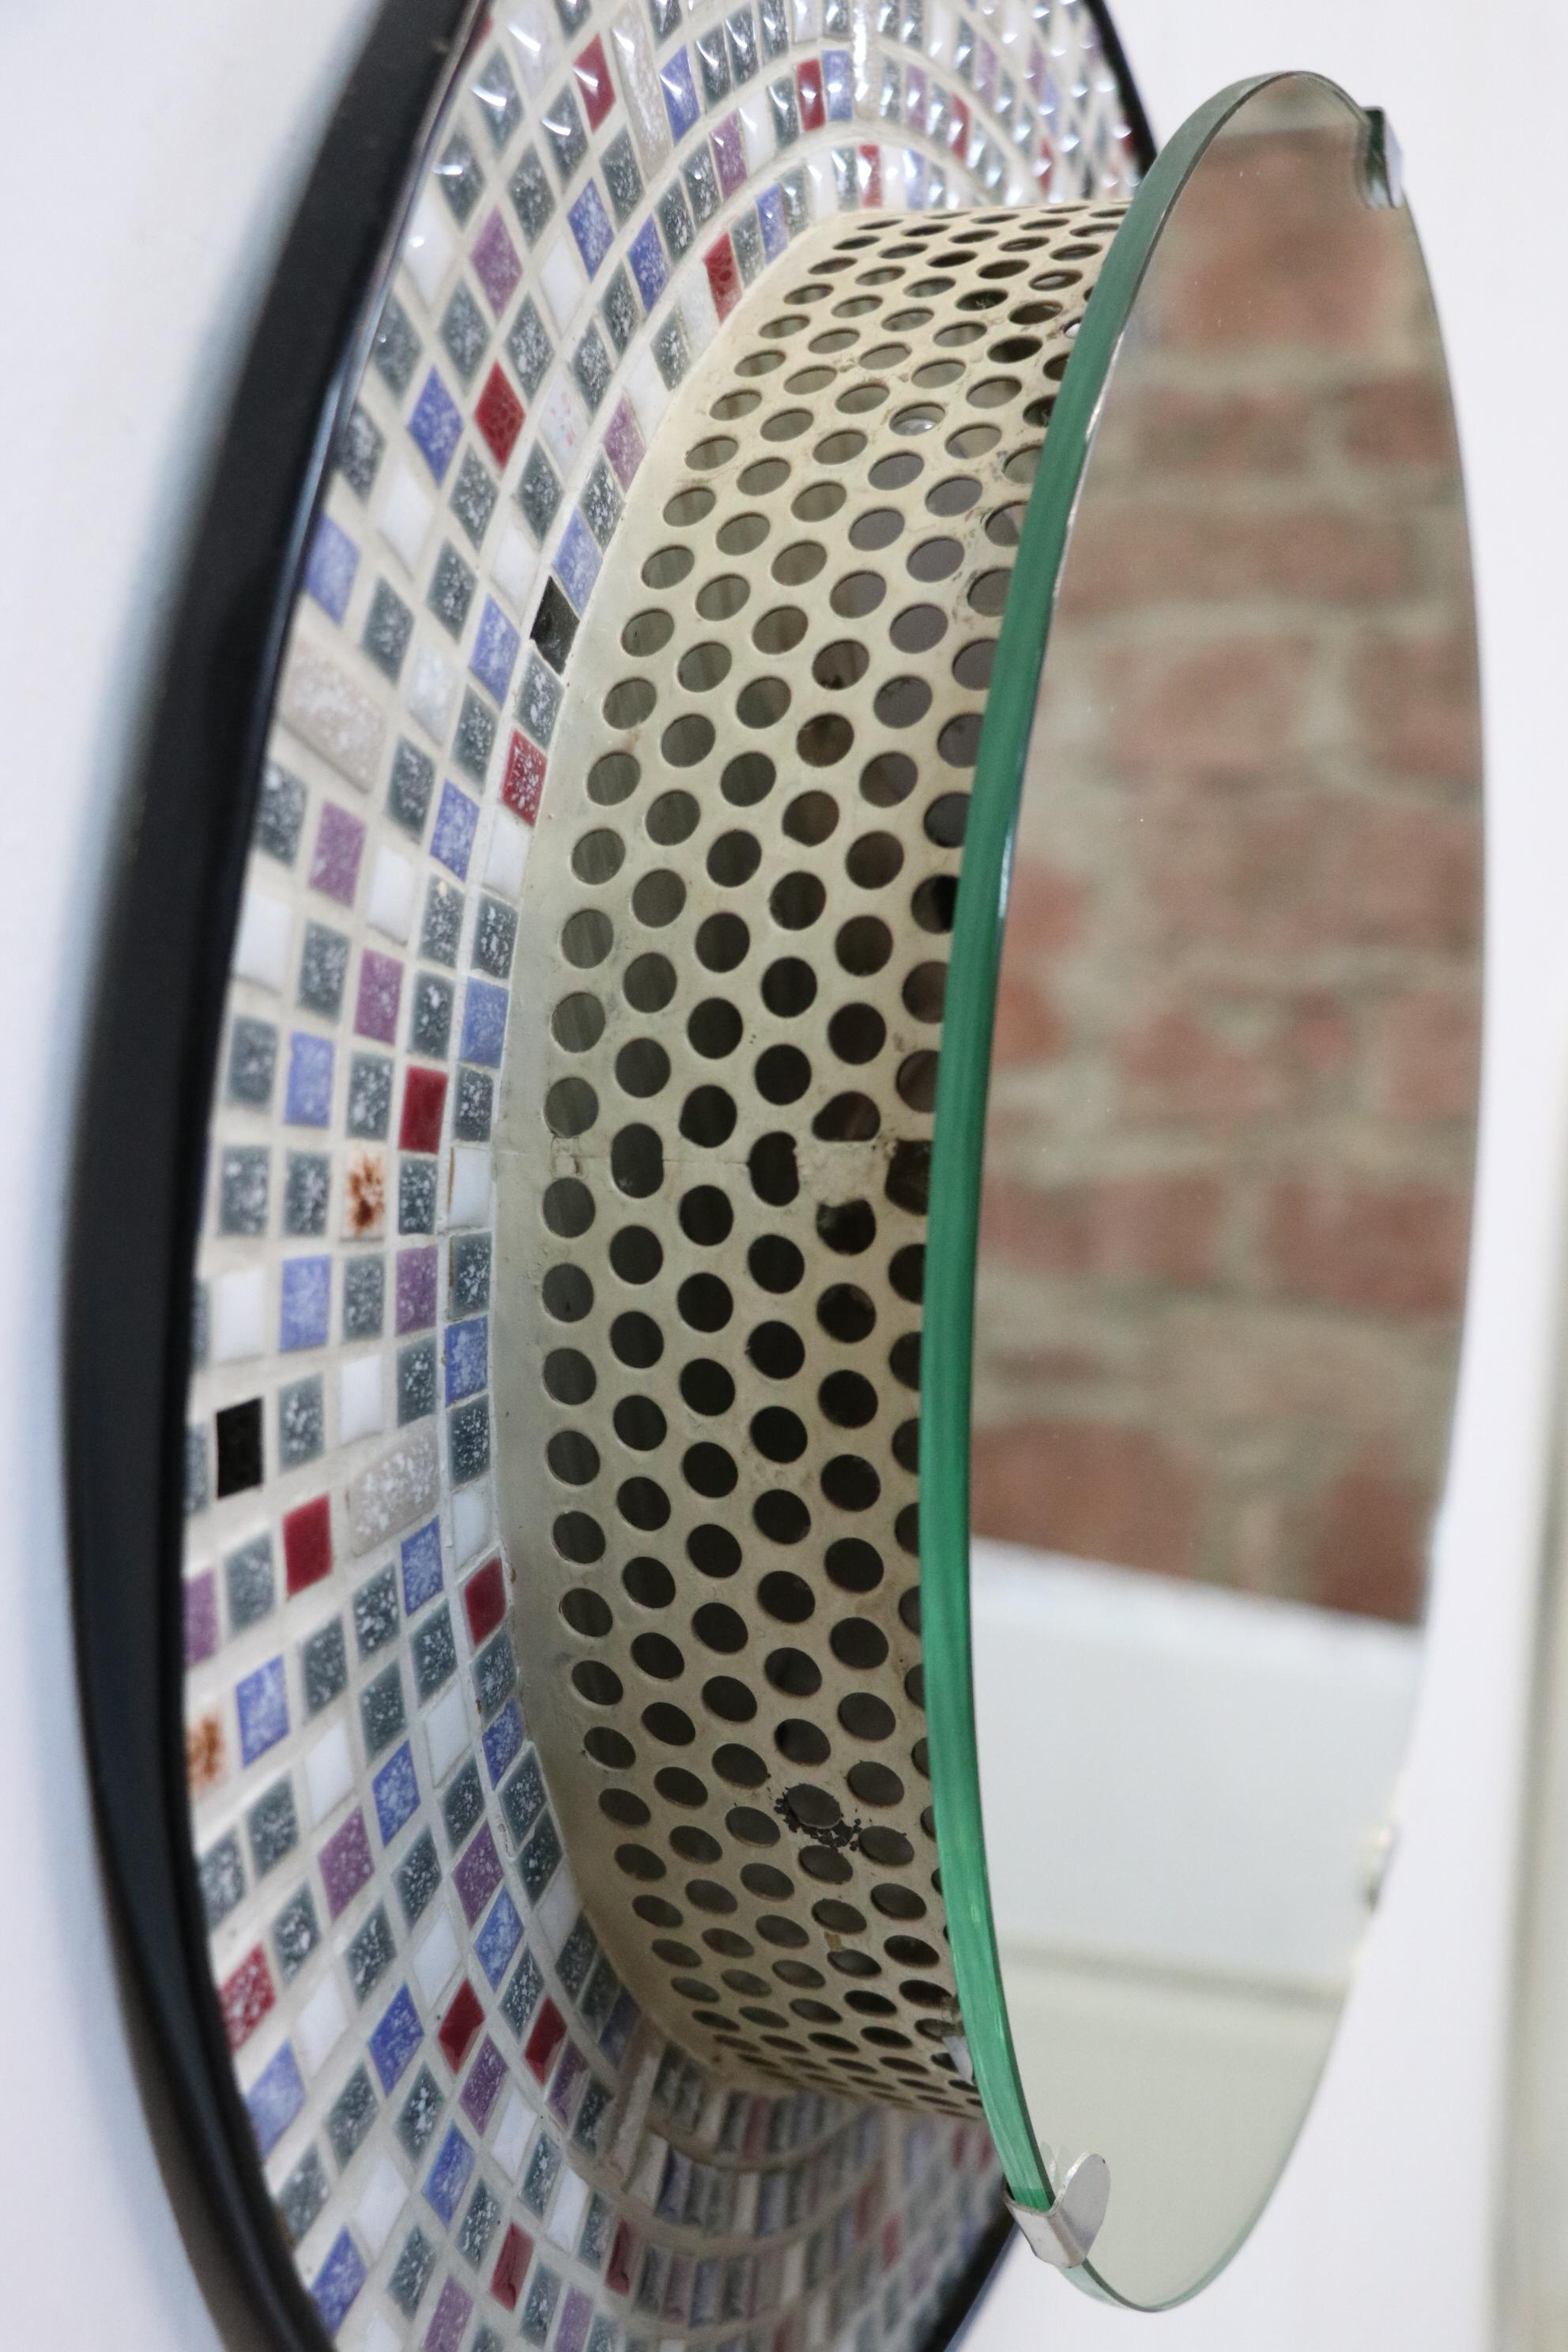 Crystal Circular Mosaic Backlit Mirror Glass and Perforated Metal, Germany 1950s For Sale